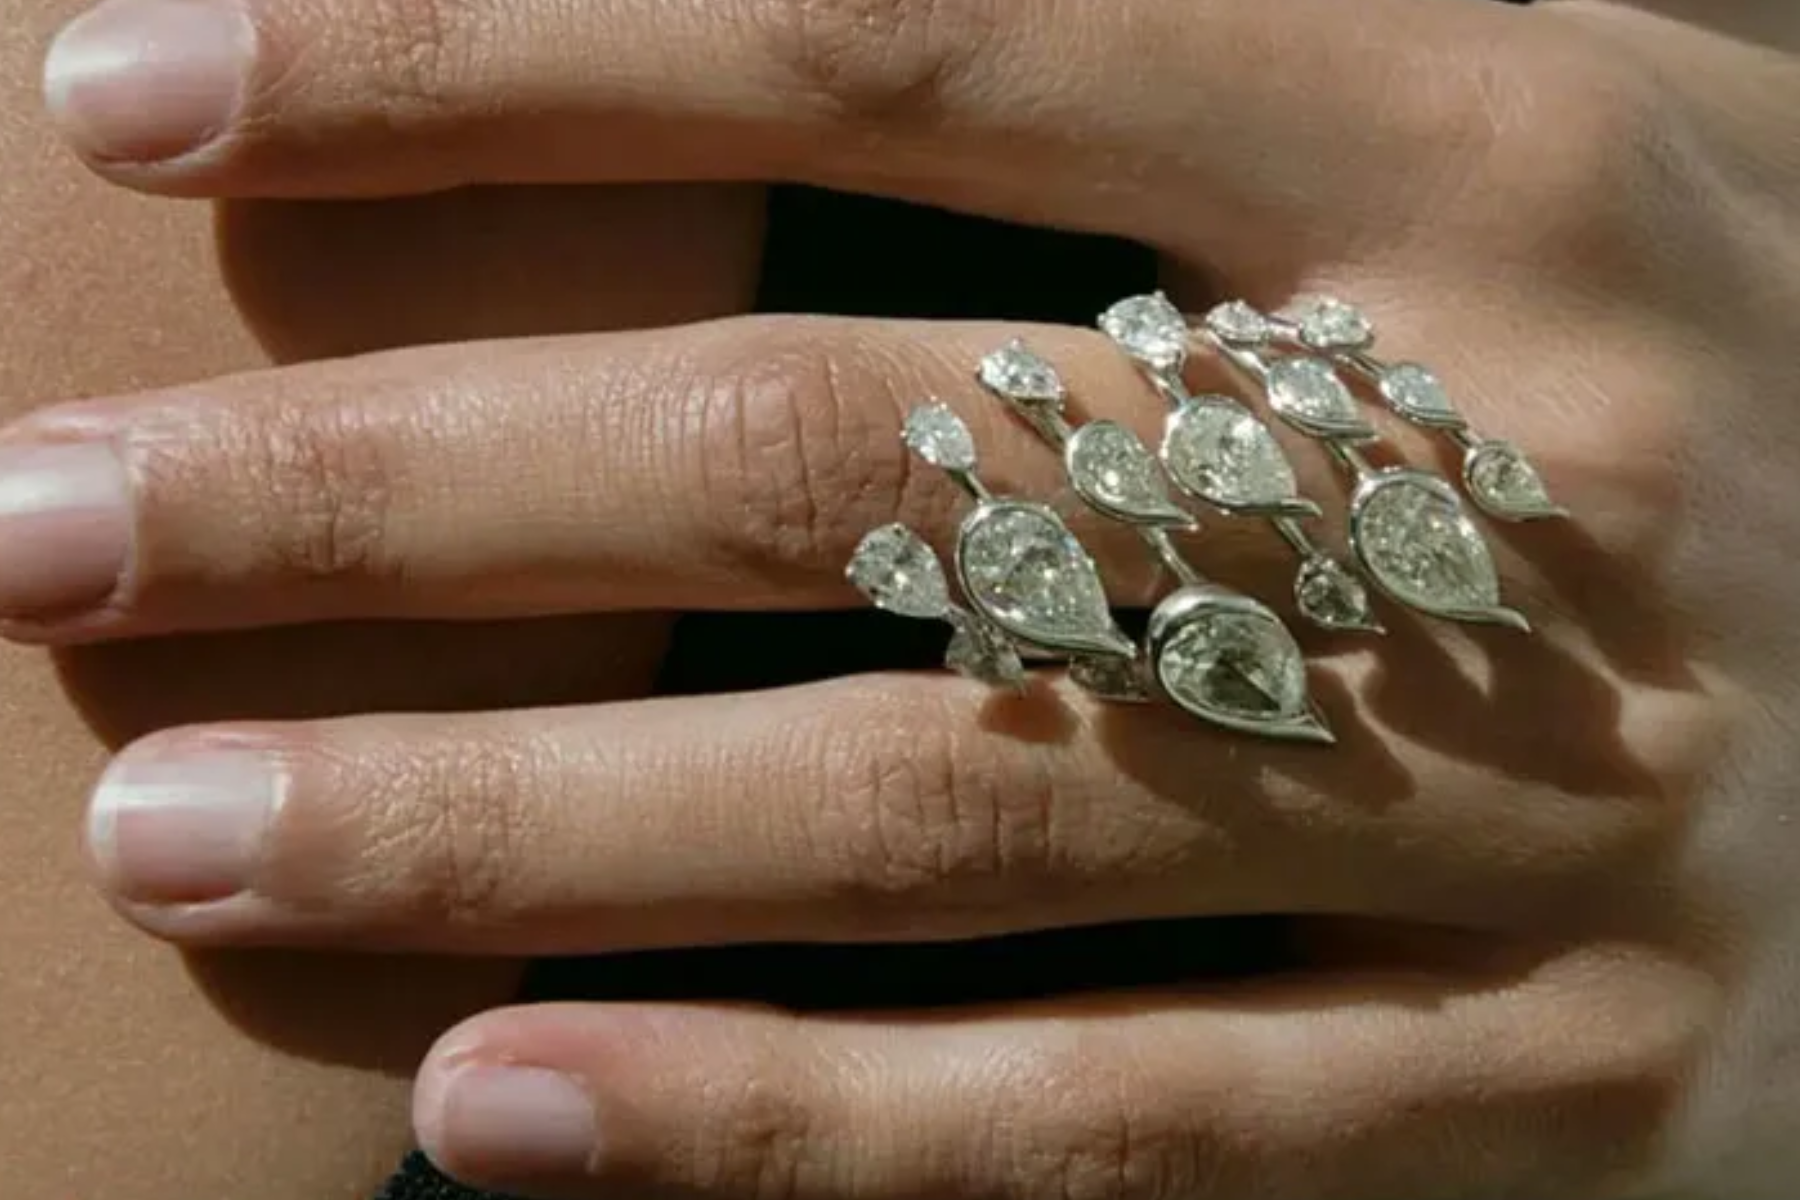 A woman wearing a diamond-encrusted ring